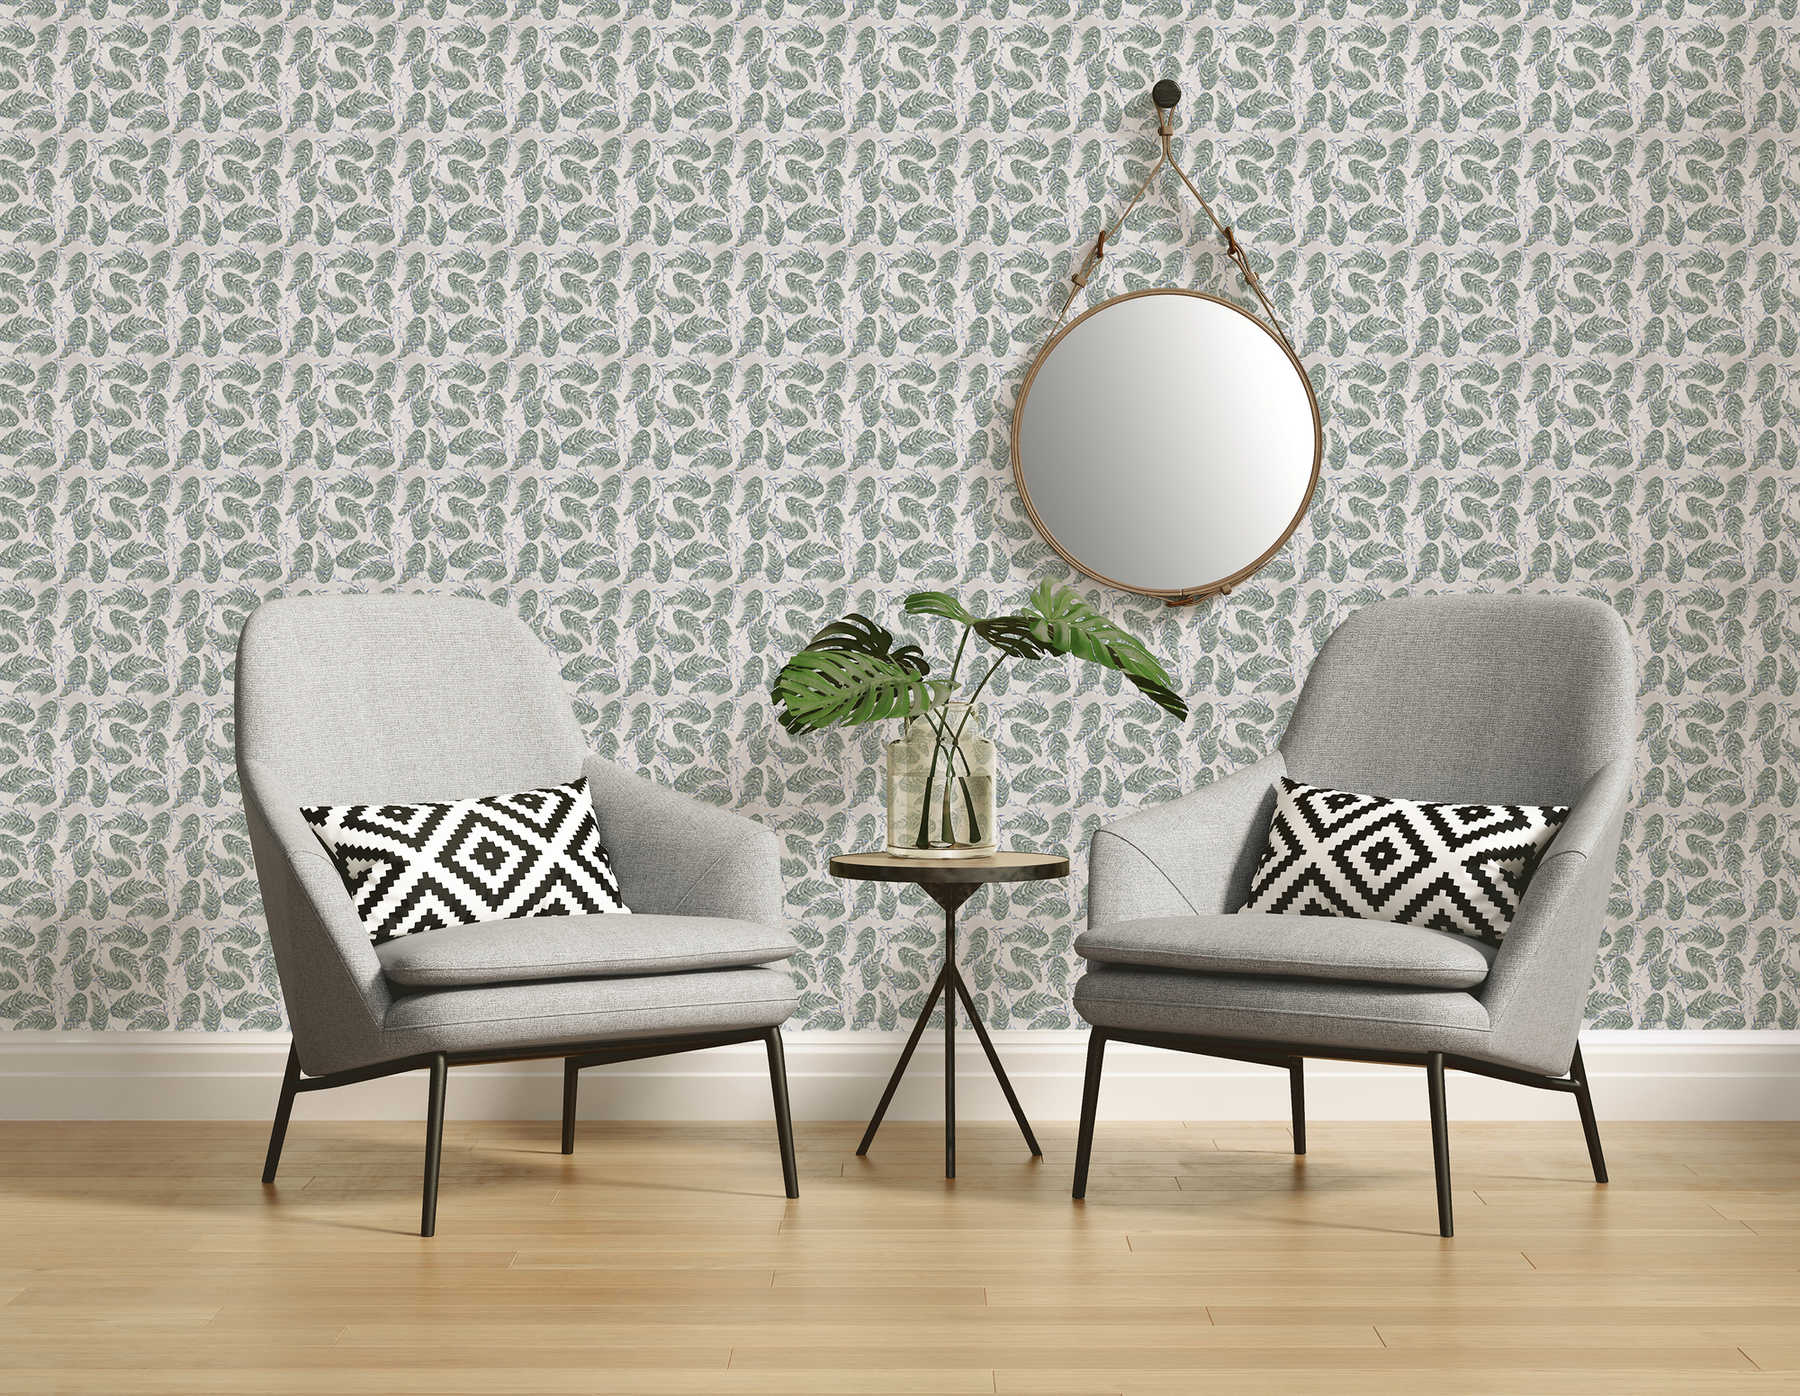             Design wall mural with floral pattern in grey and green on mother of pearl smooth nonwoven
        